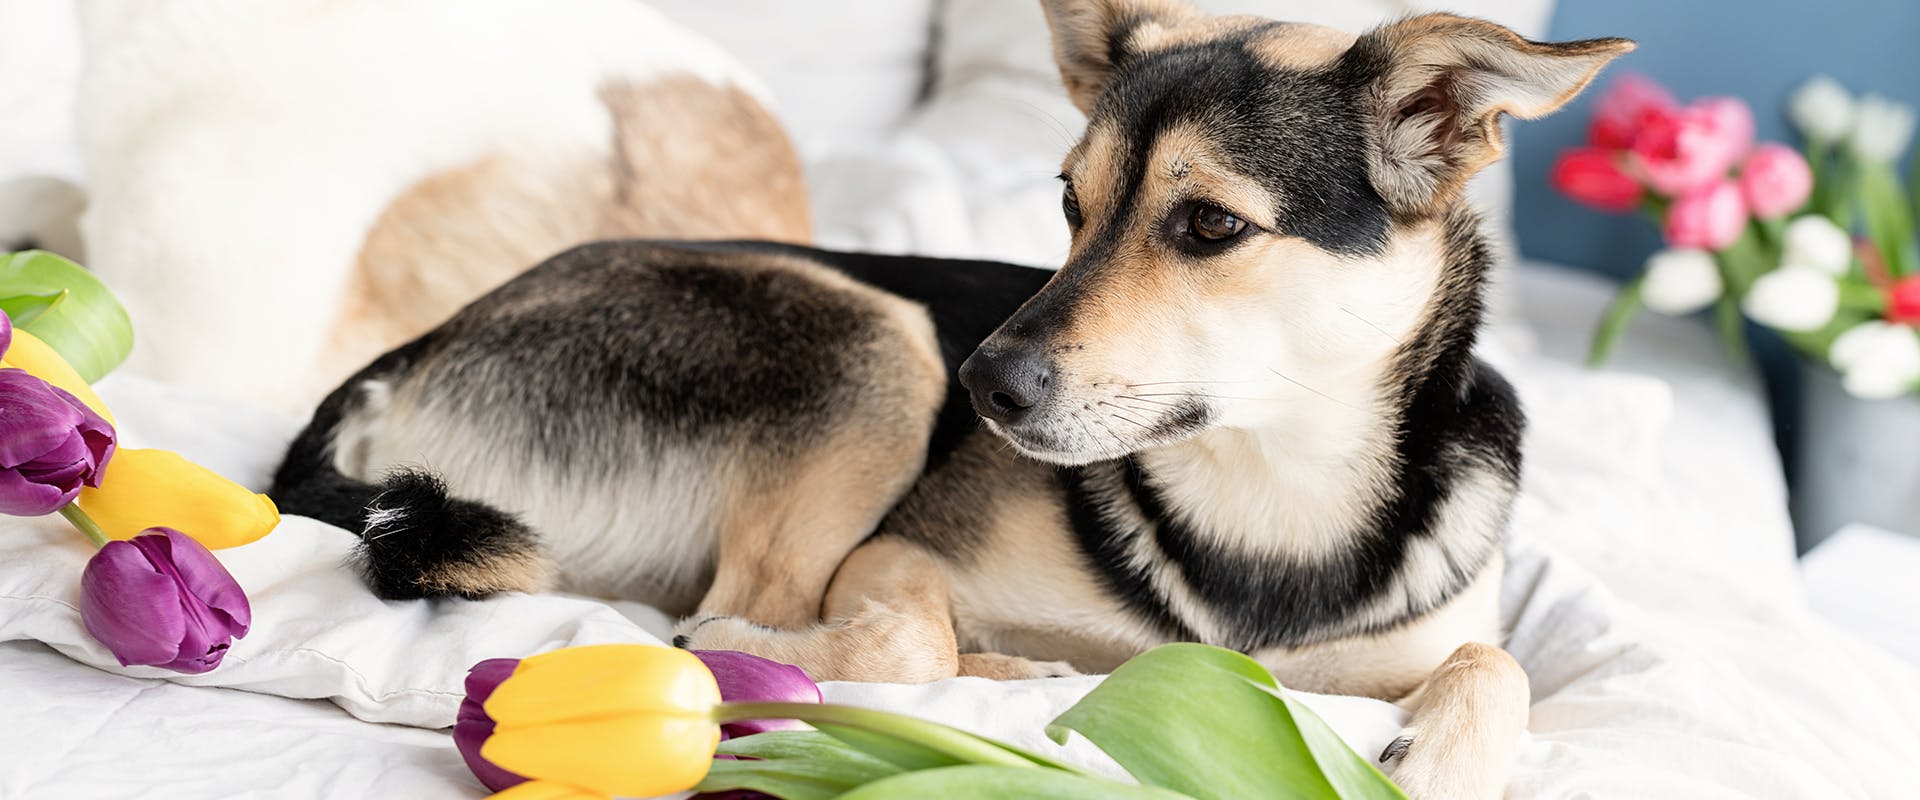 A dog sitting on a bed, yellow and purple tulips surrounding it